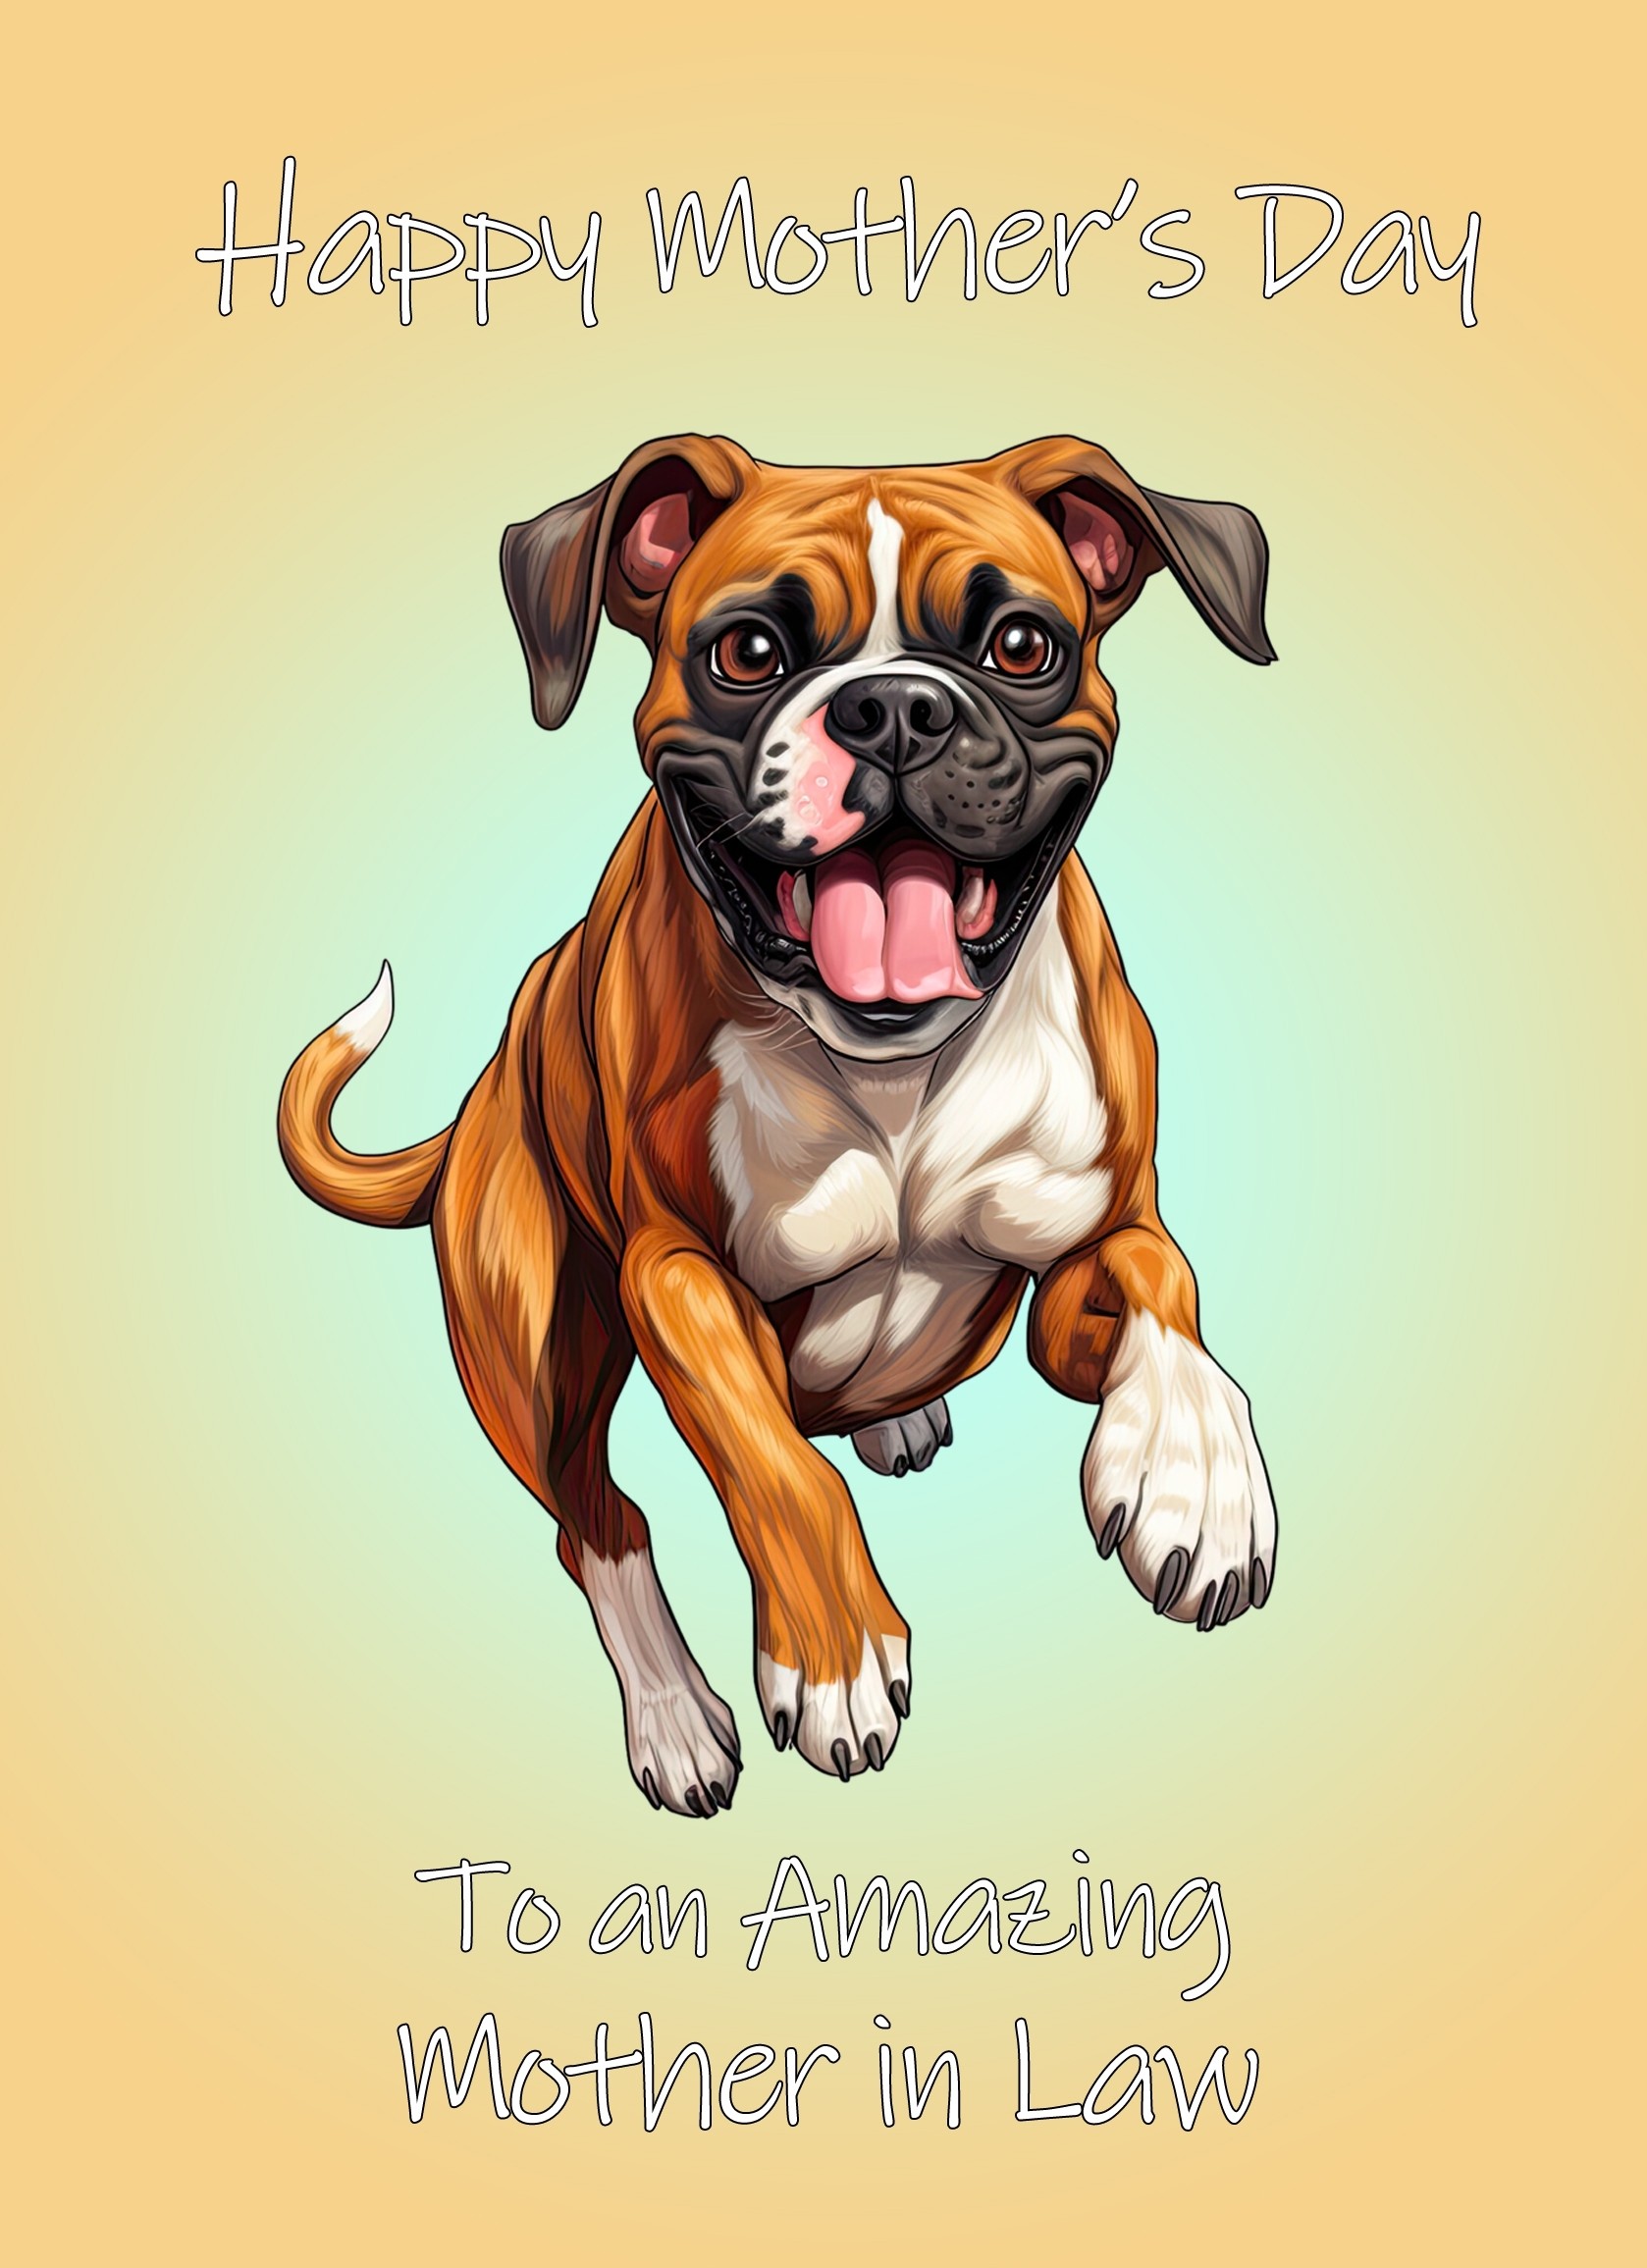 Boxer Dog Mothers Day Card For Mother in Law